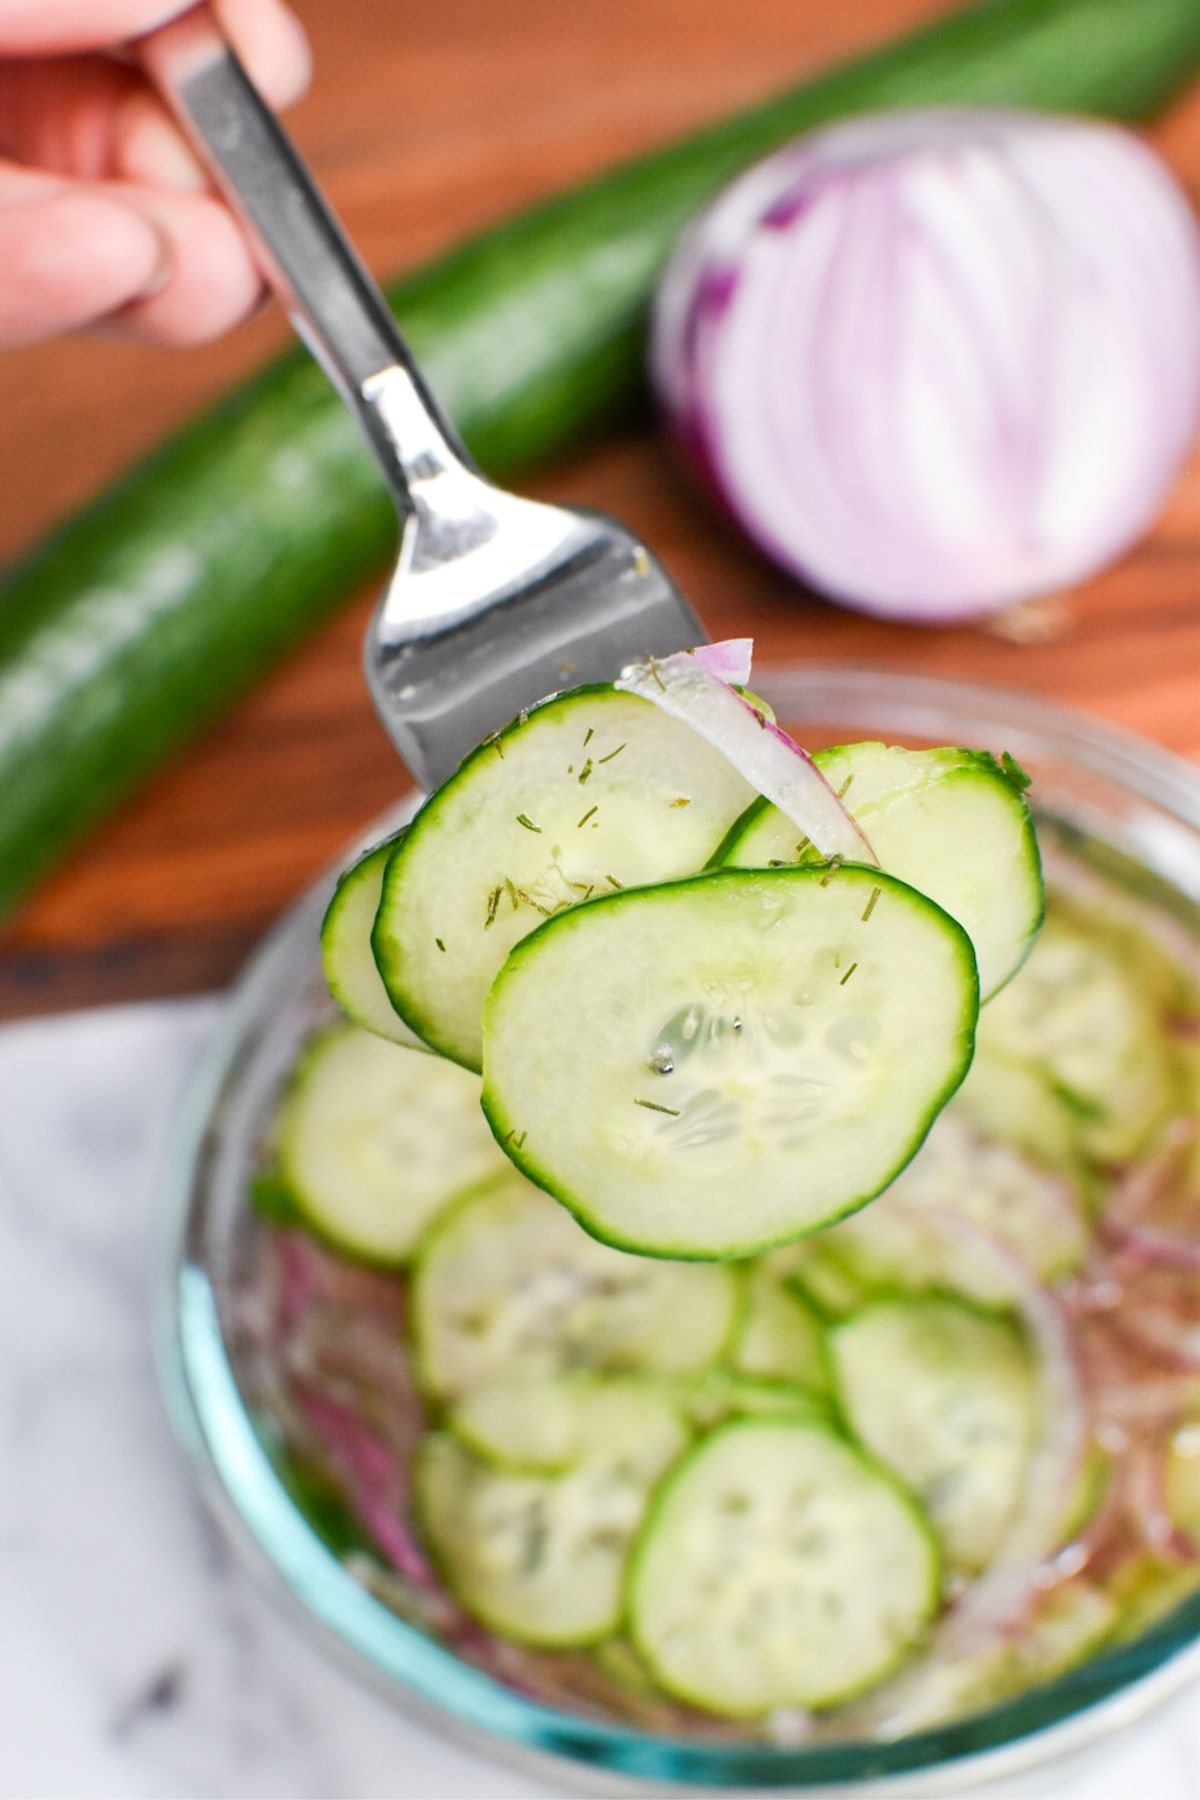 A fork with cucumbers and red onion on it.